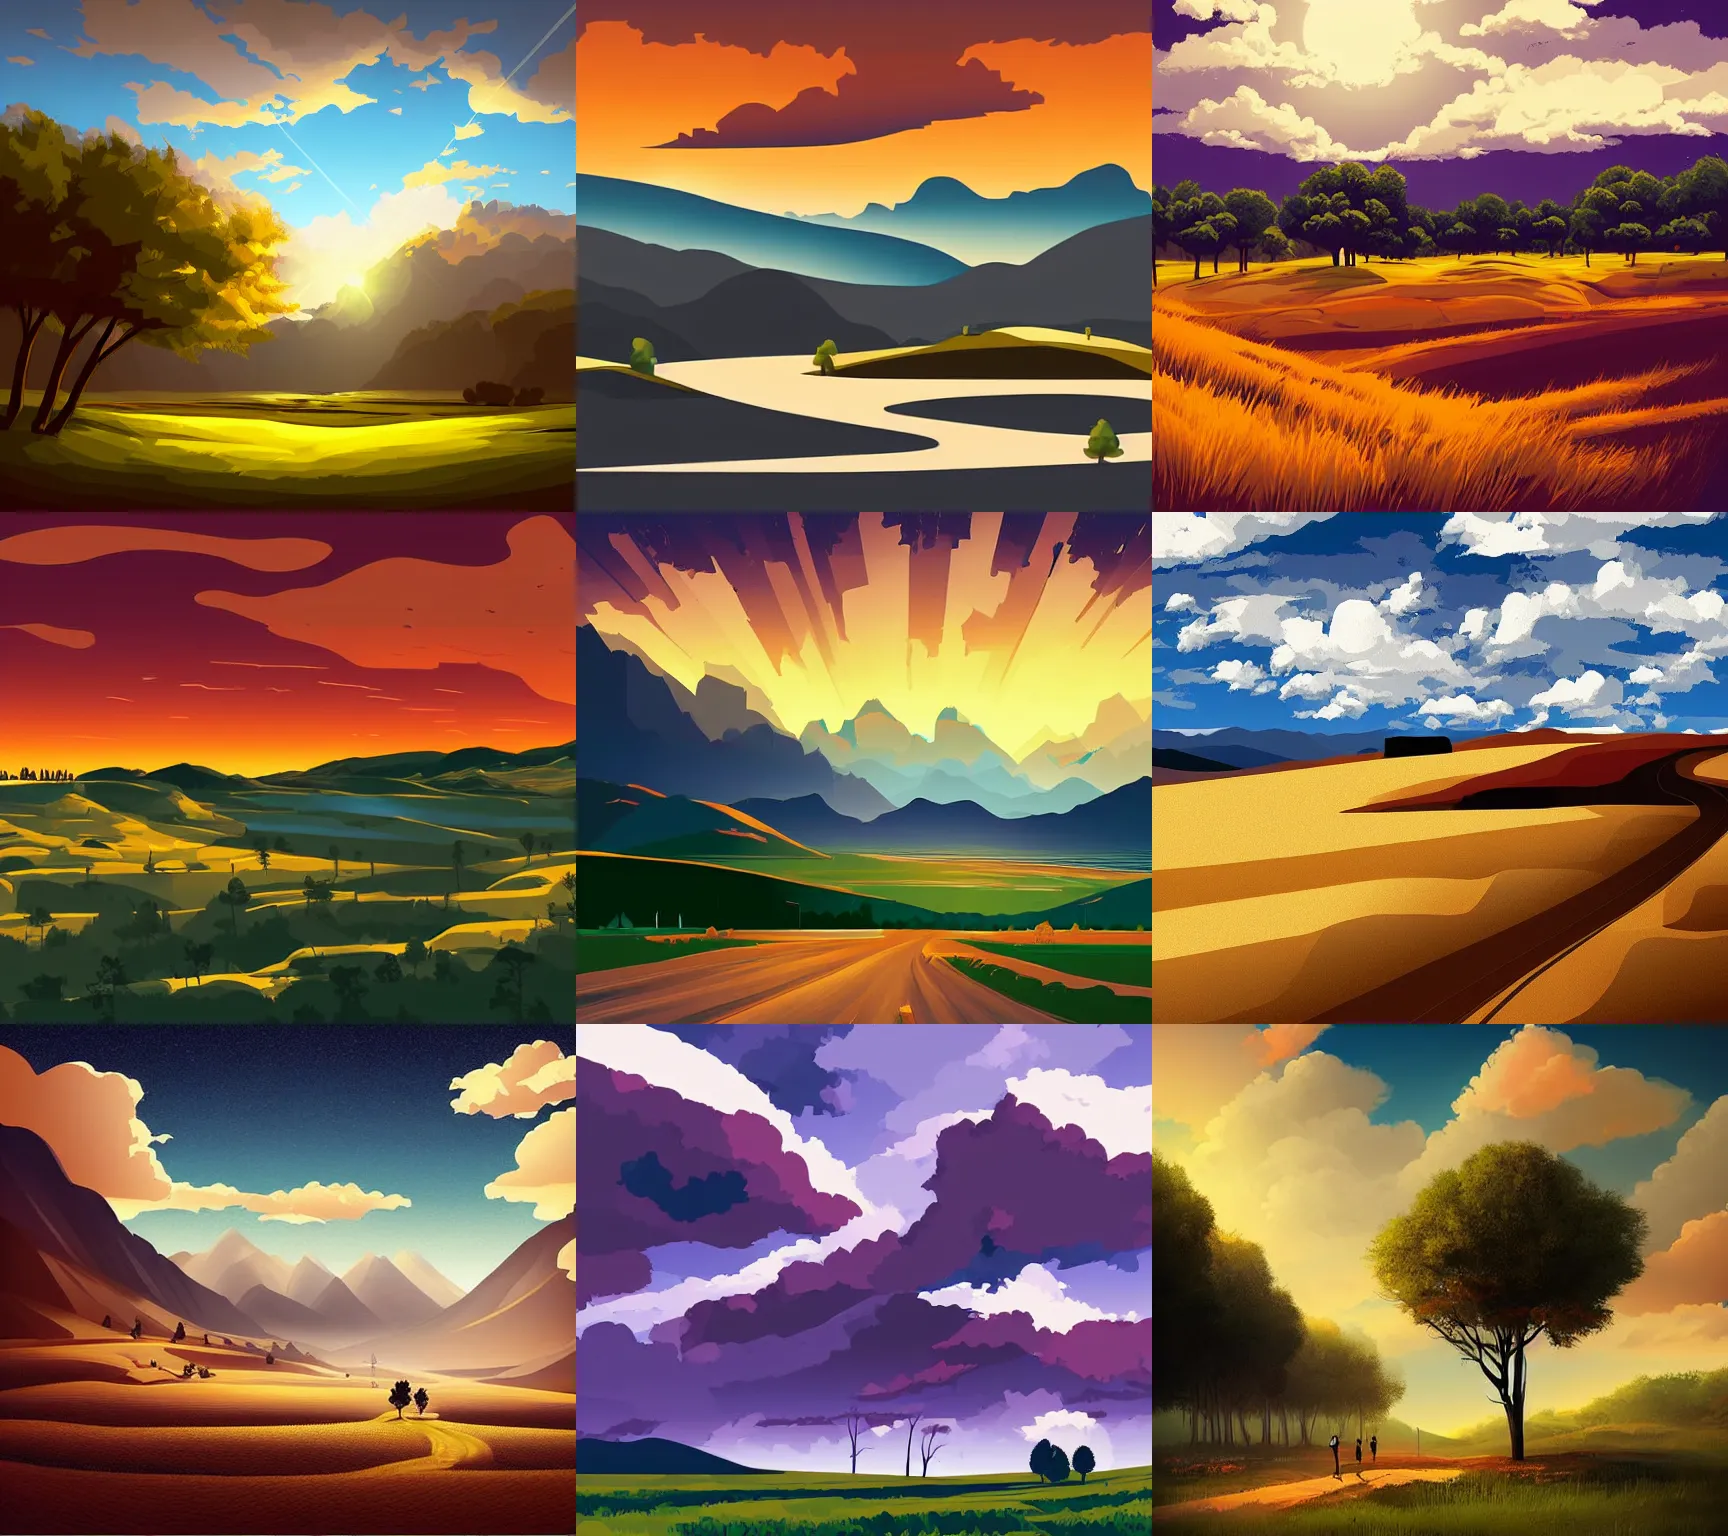 Prompt: nothern landscape painting game smooth median photoshop filter cutout vector, behance hd by by rhads, global illumination adove low clouds sky image overcast